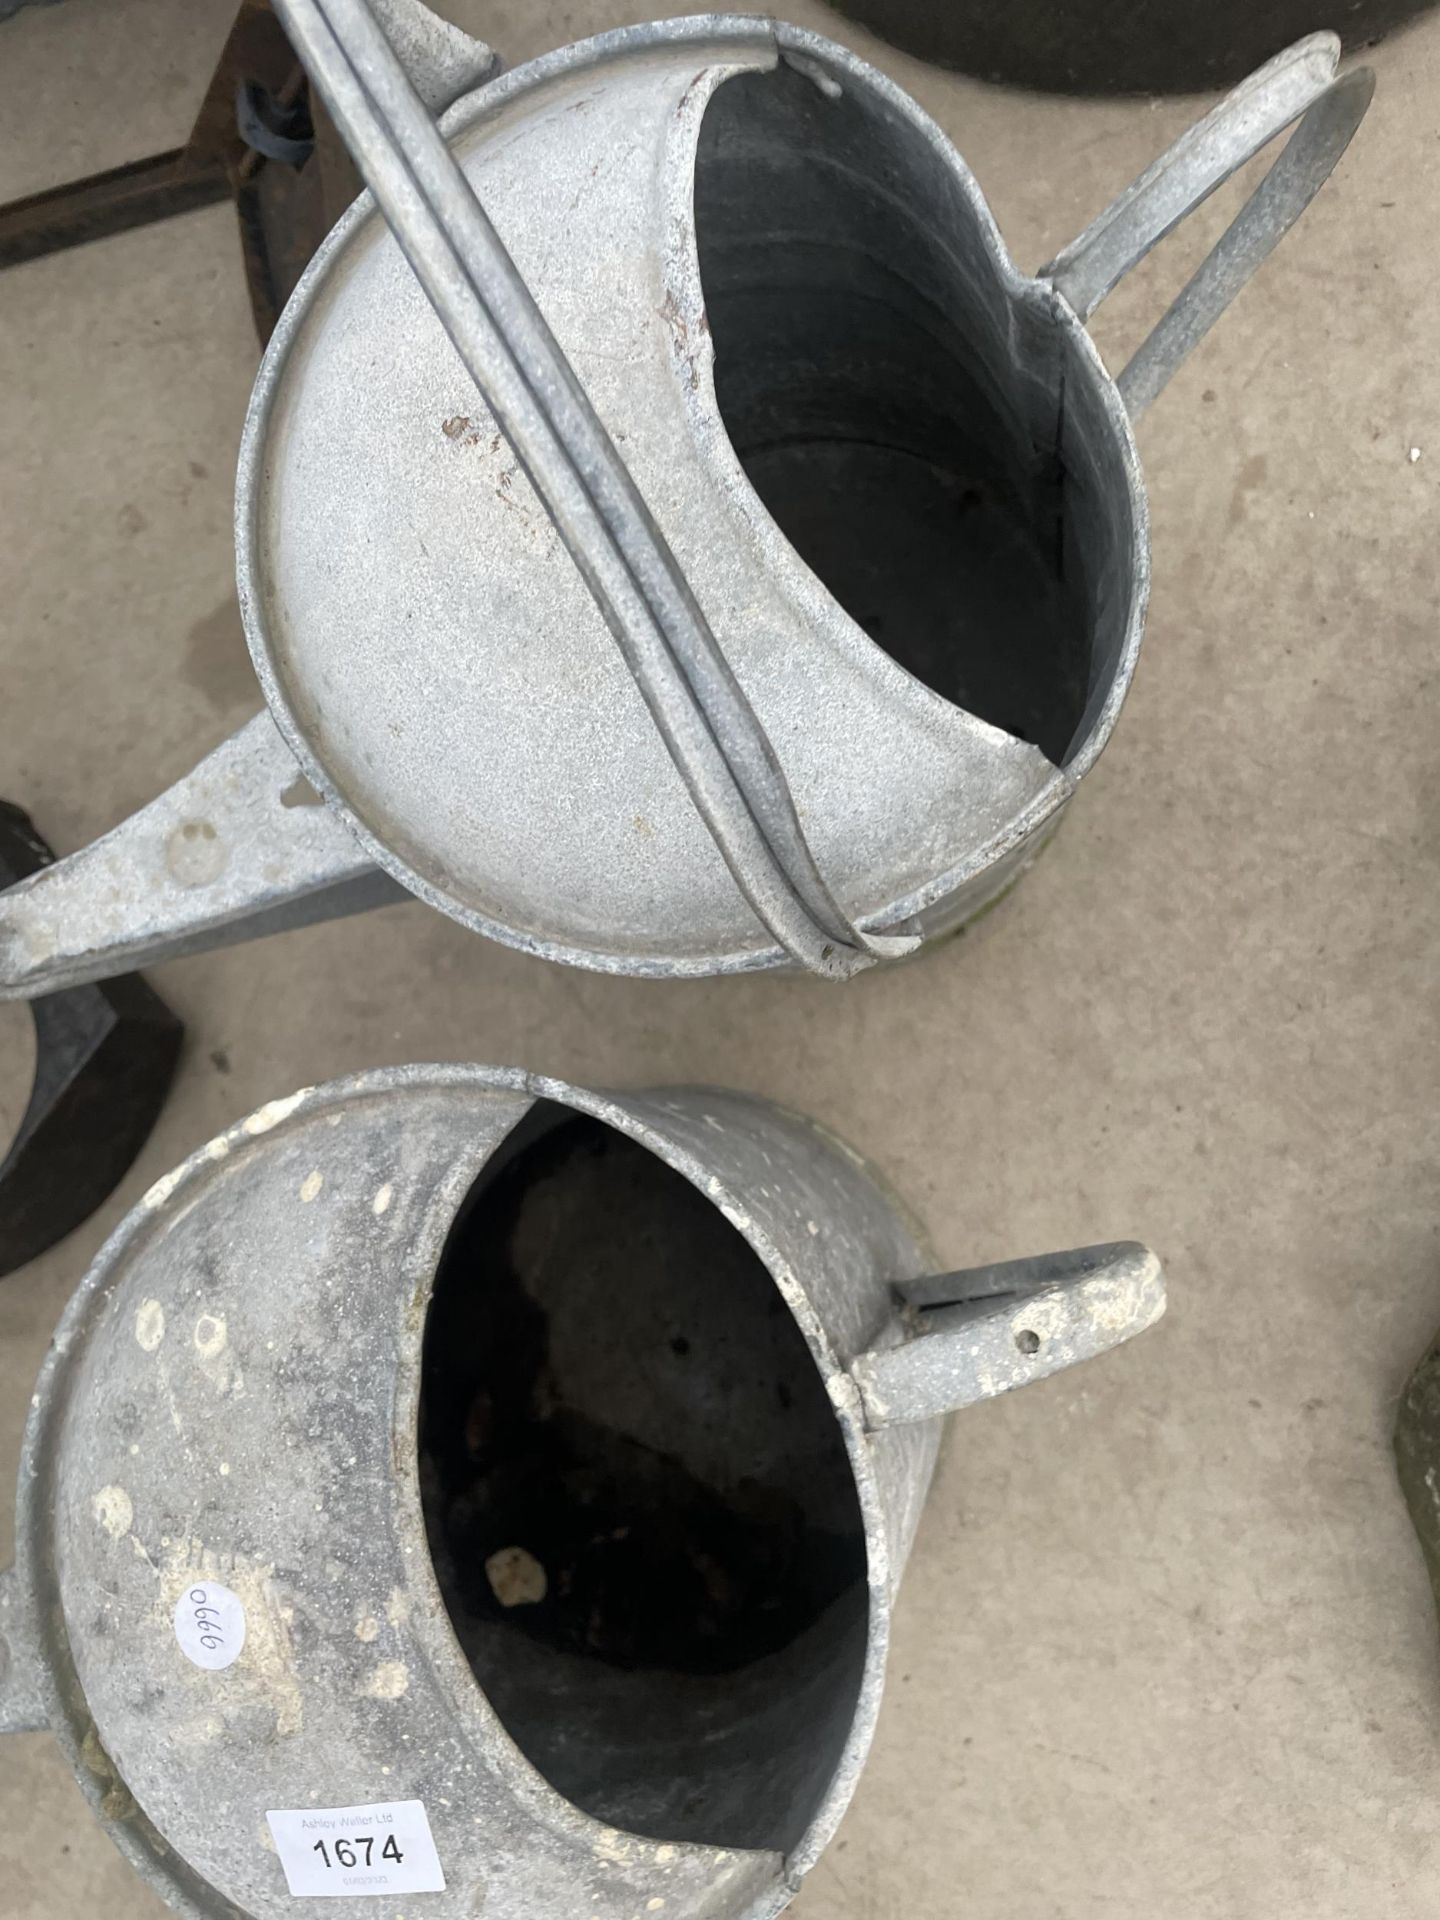 TWO VINTAGE GALVANISED WATERING CANS - Image 2 of 2